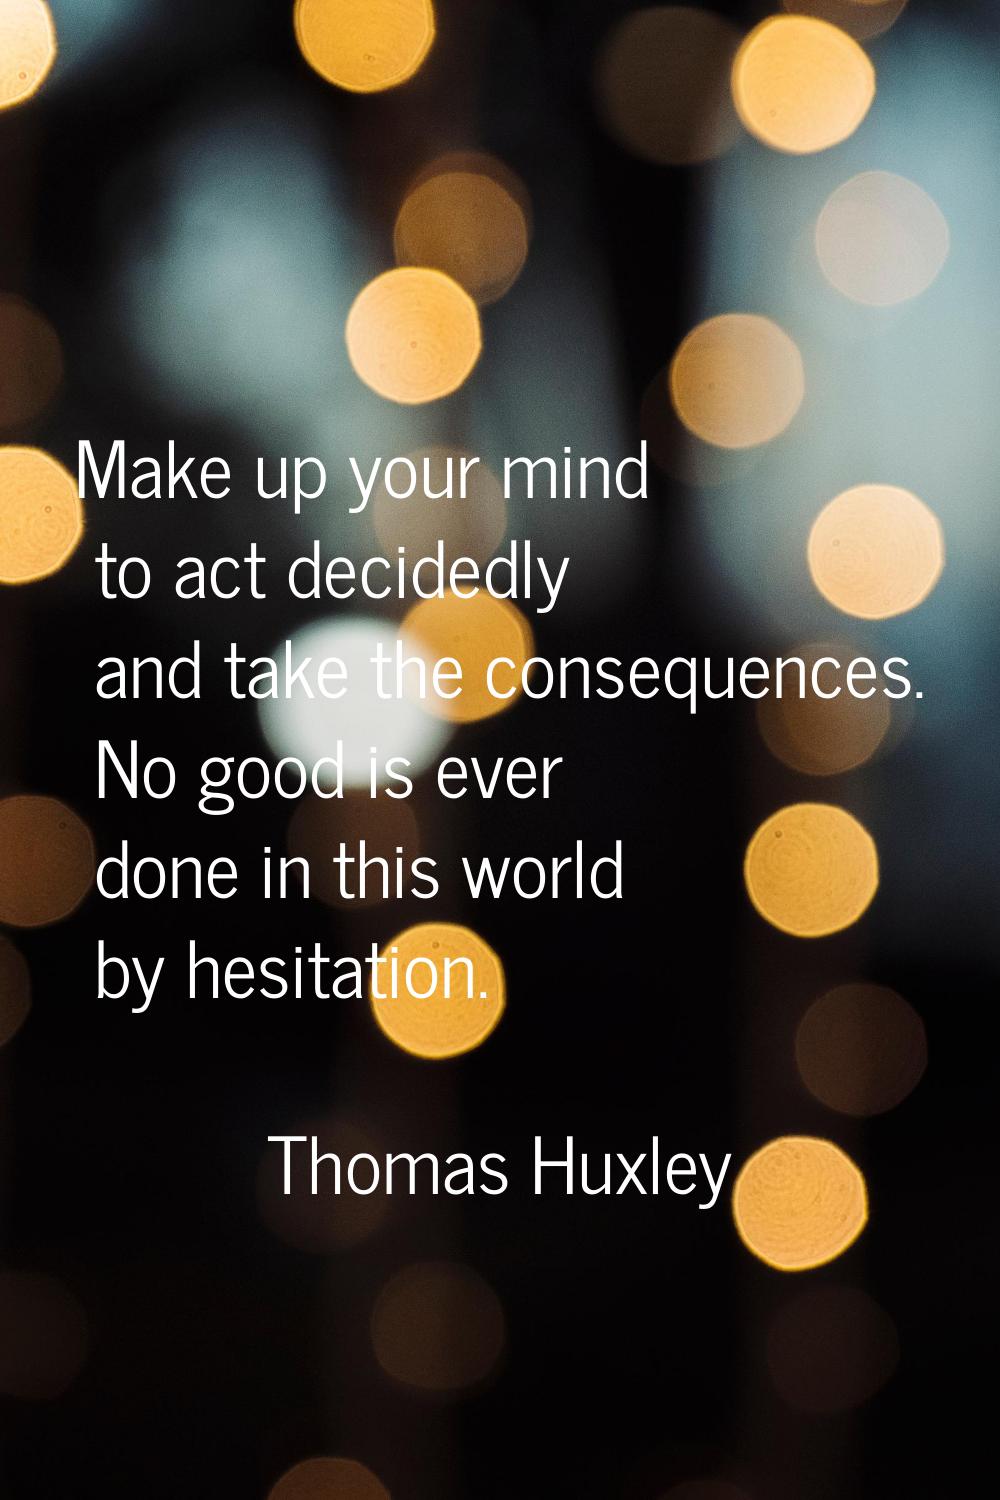 Make up your mind to act decidedly and take the consequences. No good is ever done in this world by